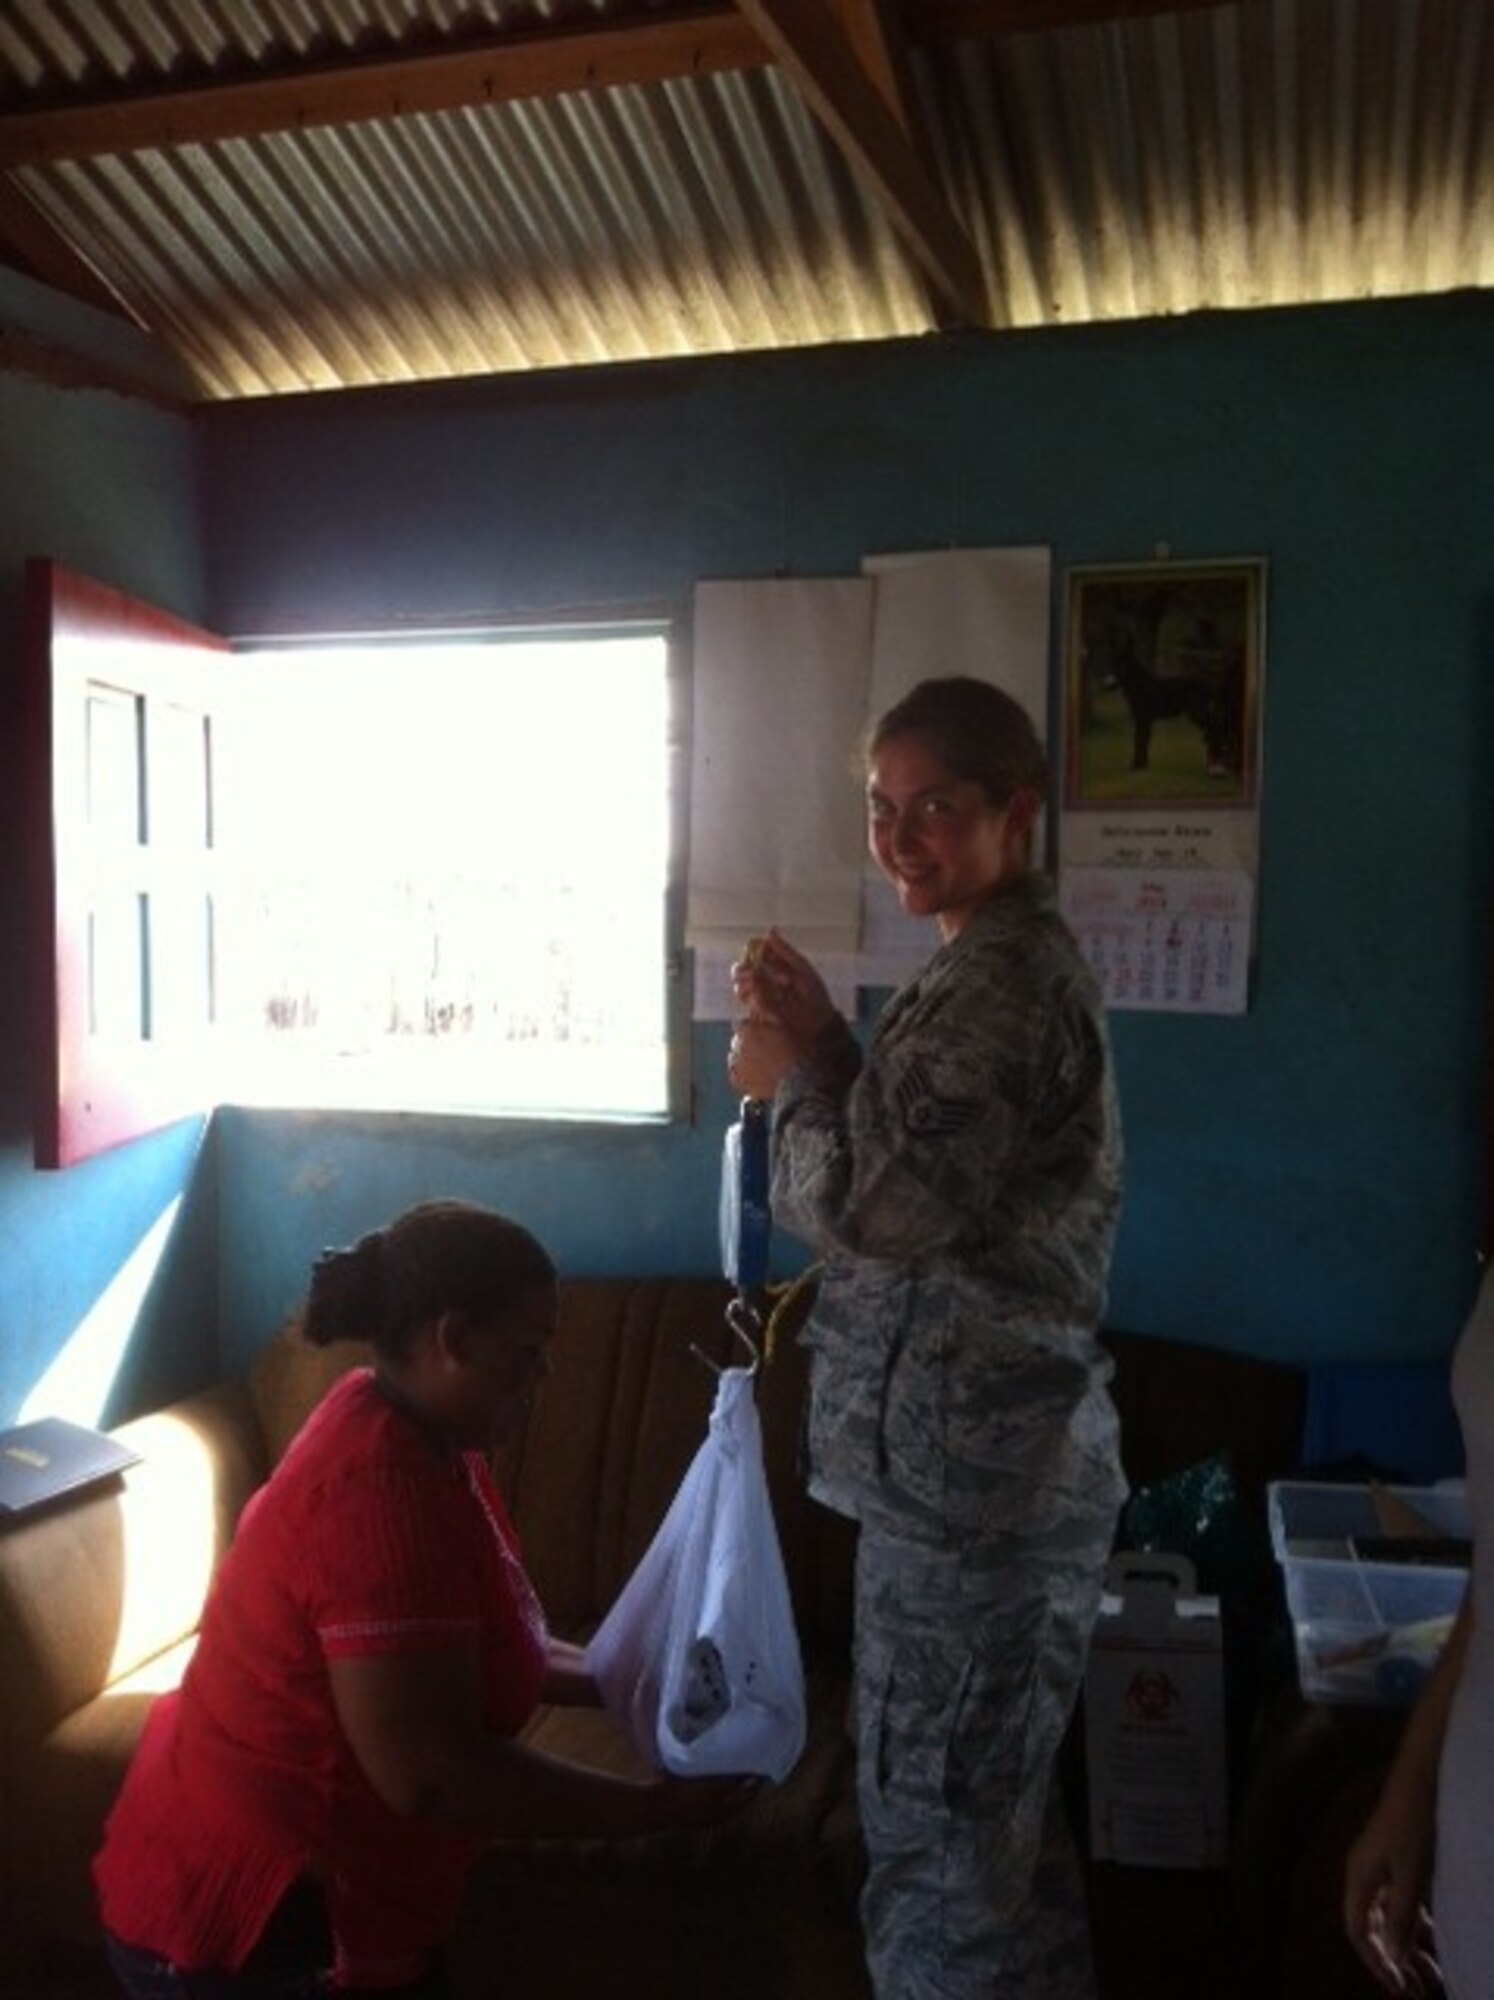 Members of the International Health Specialist (IHS) Division, 12th Air Force (Air Forces Southern), work with partner nations to provide medical, dental, and public health support to host nation civilian populations. (Courtesy Photo/Released)